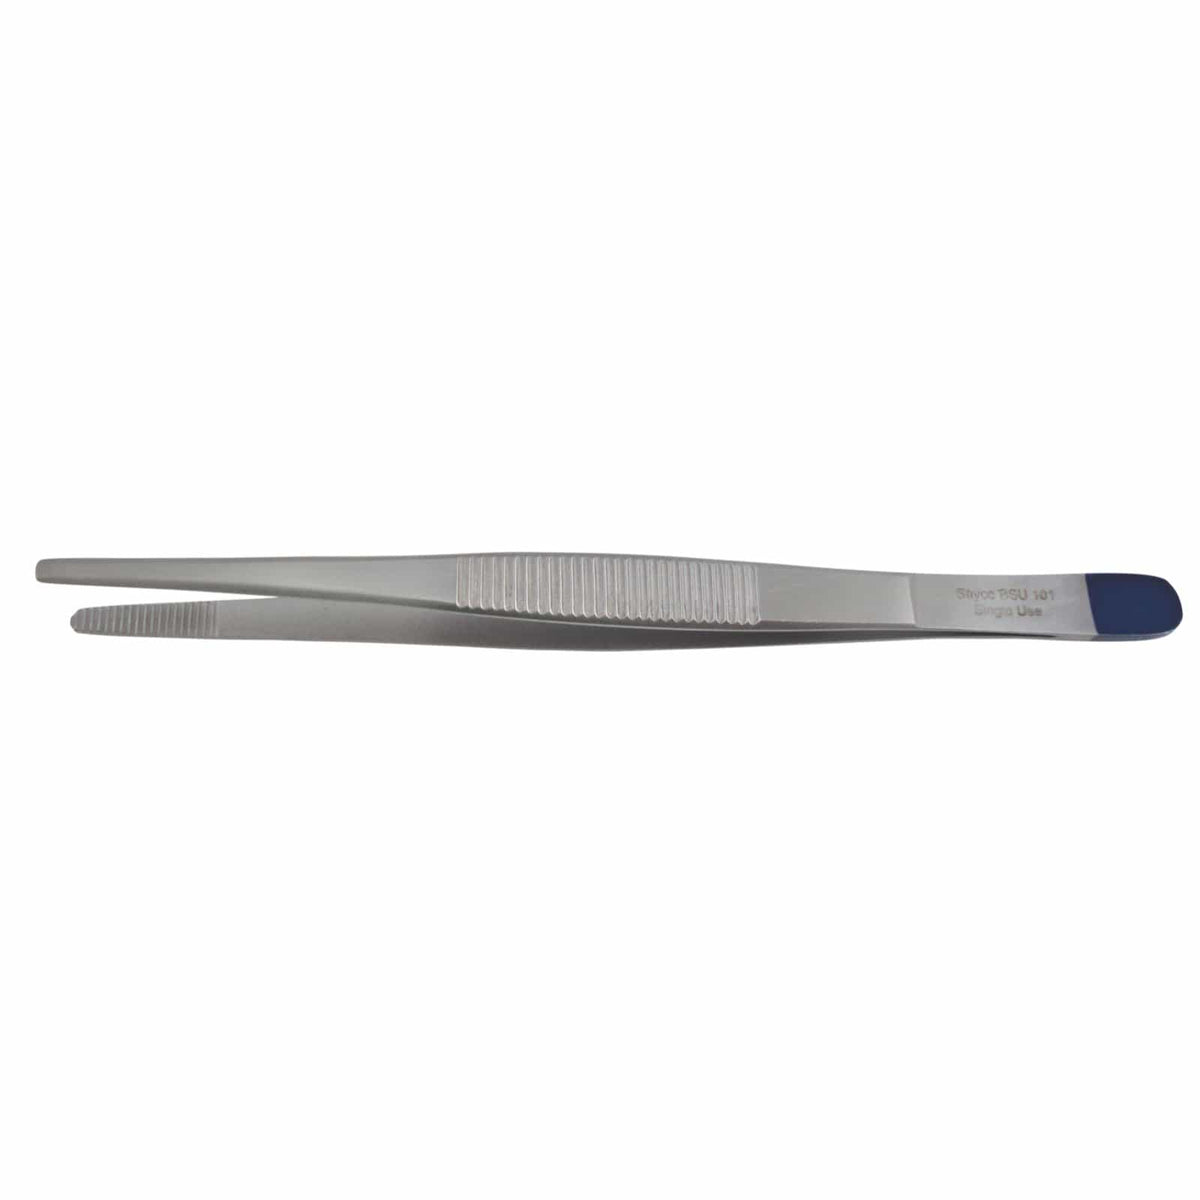 SAYCO Sterile Surgical Instruments 12cm / Blunt SAYCO Sterile Standard Dressing Forceps